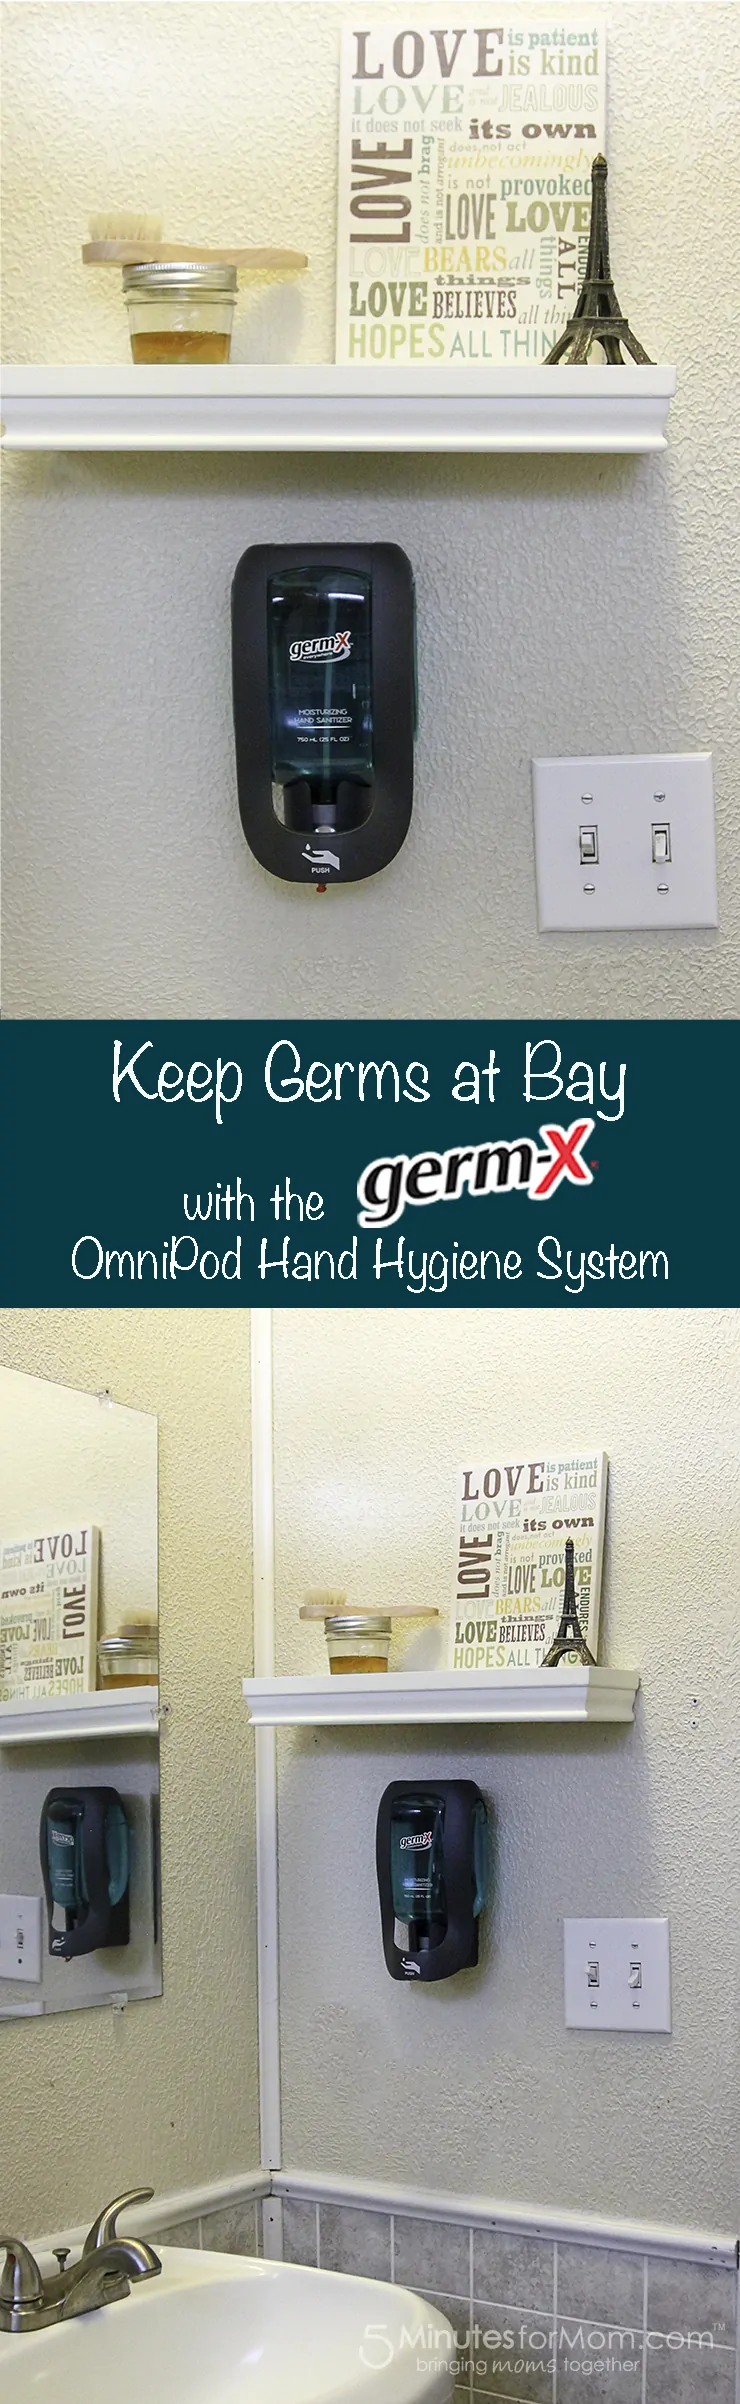 Keep Germs at bay with the Germ-X OmniPod Hand Hygiene System